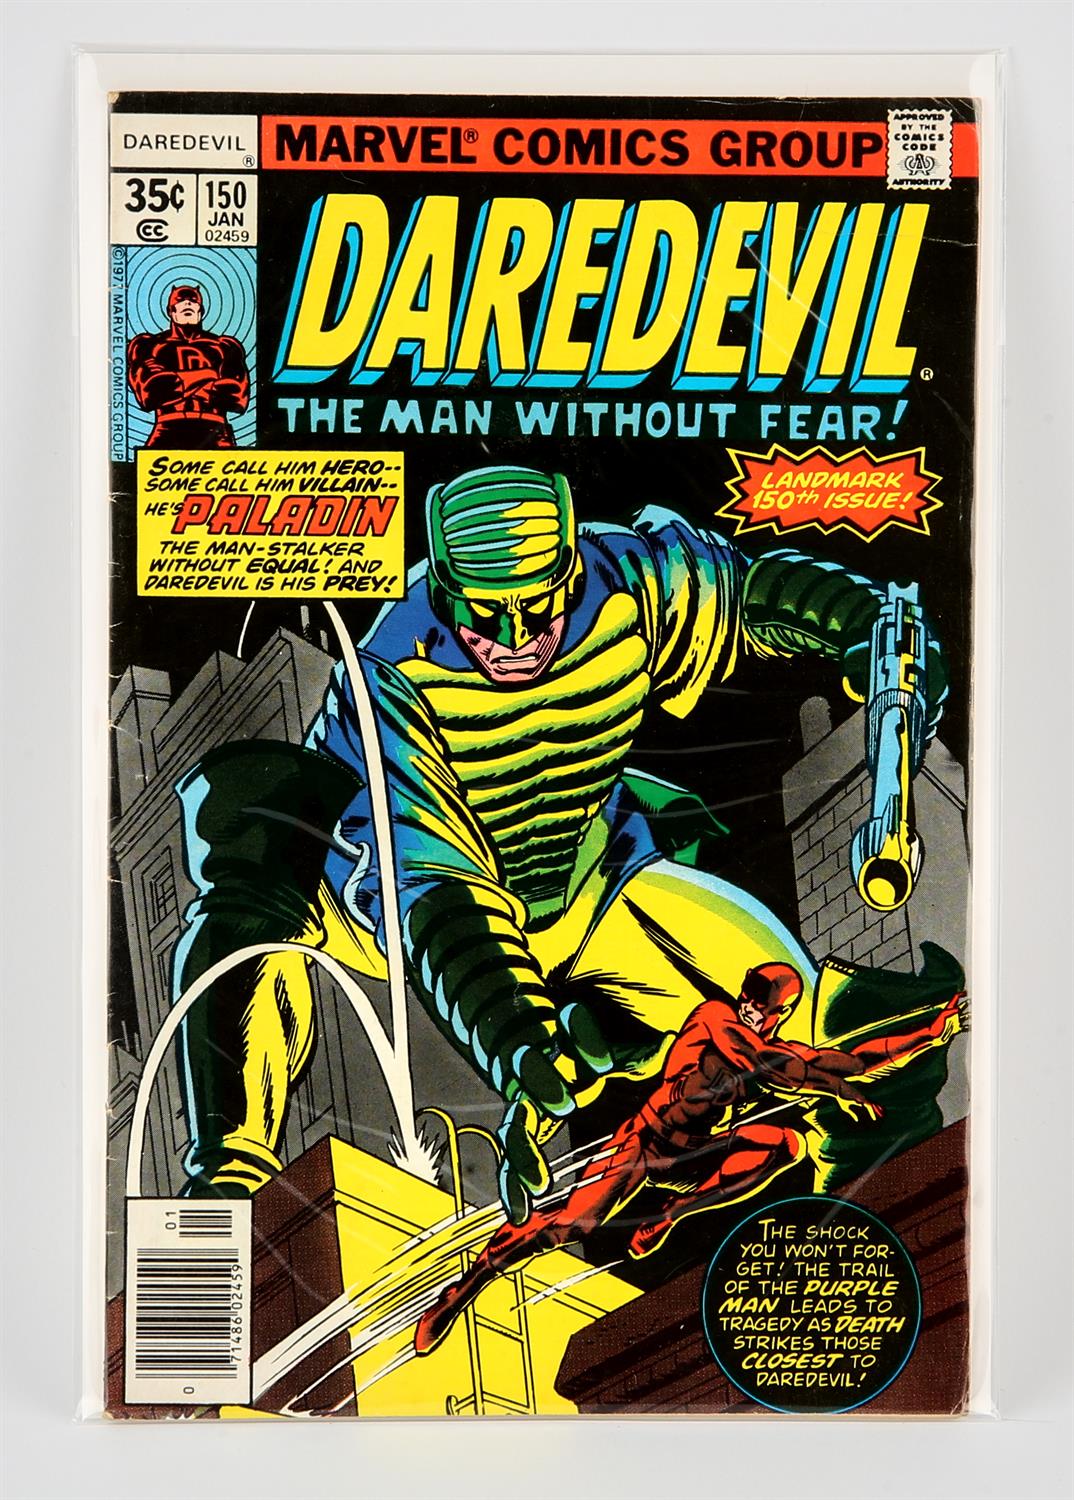 Marvel Comics: Daredevil No. 150 featuring the 1st appearance of Paladin (1977). Featuring the 1st